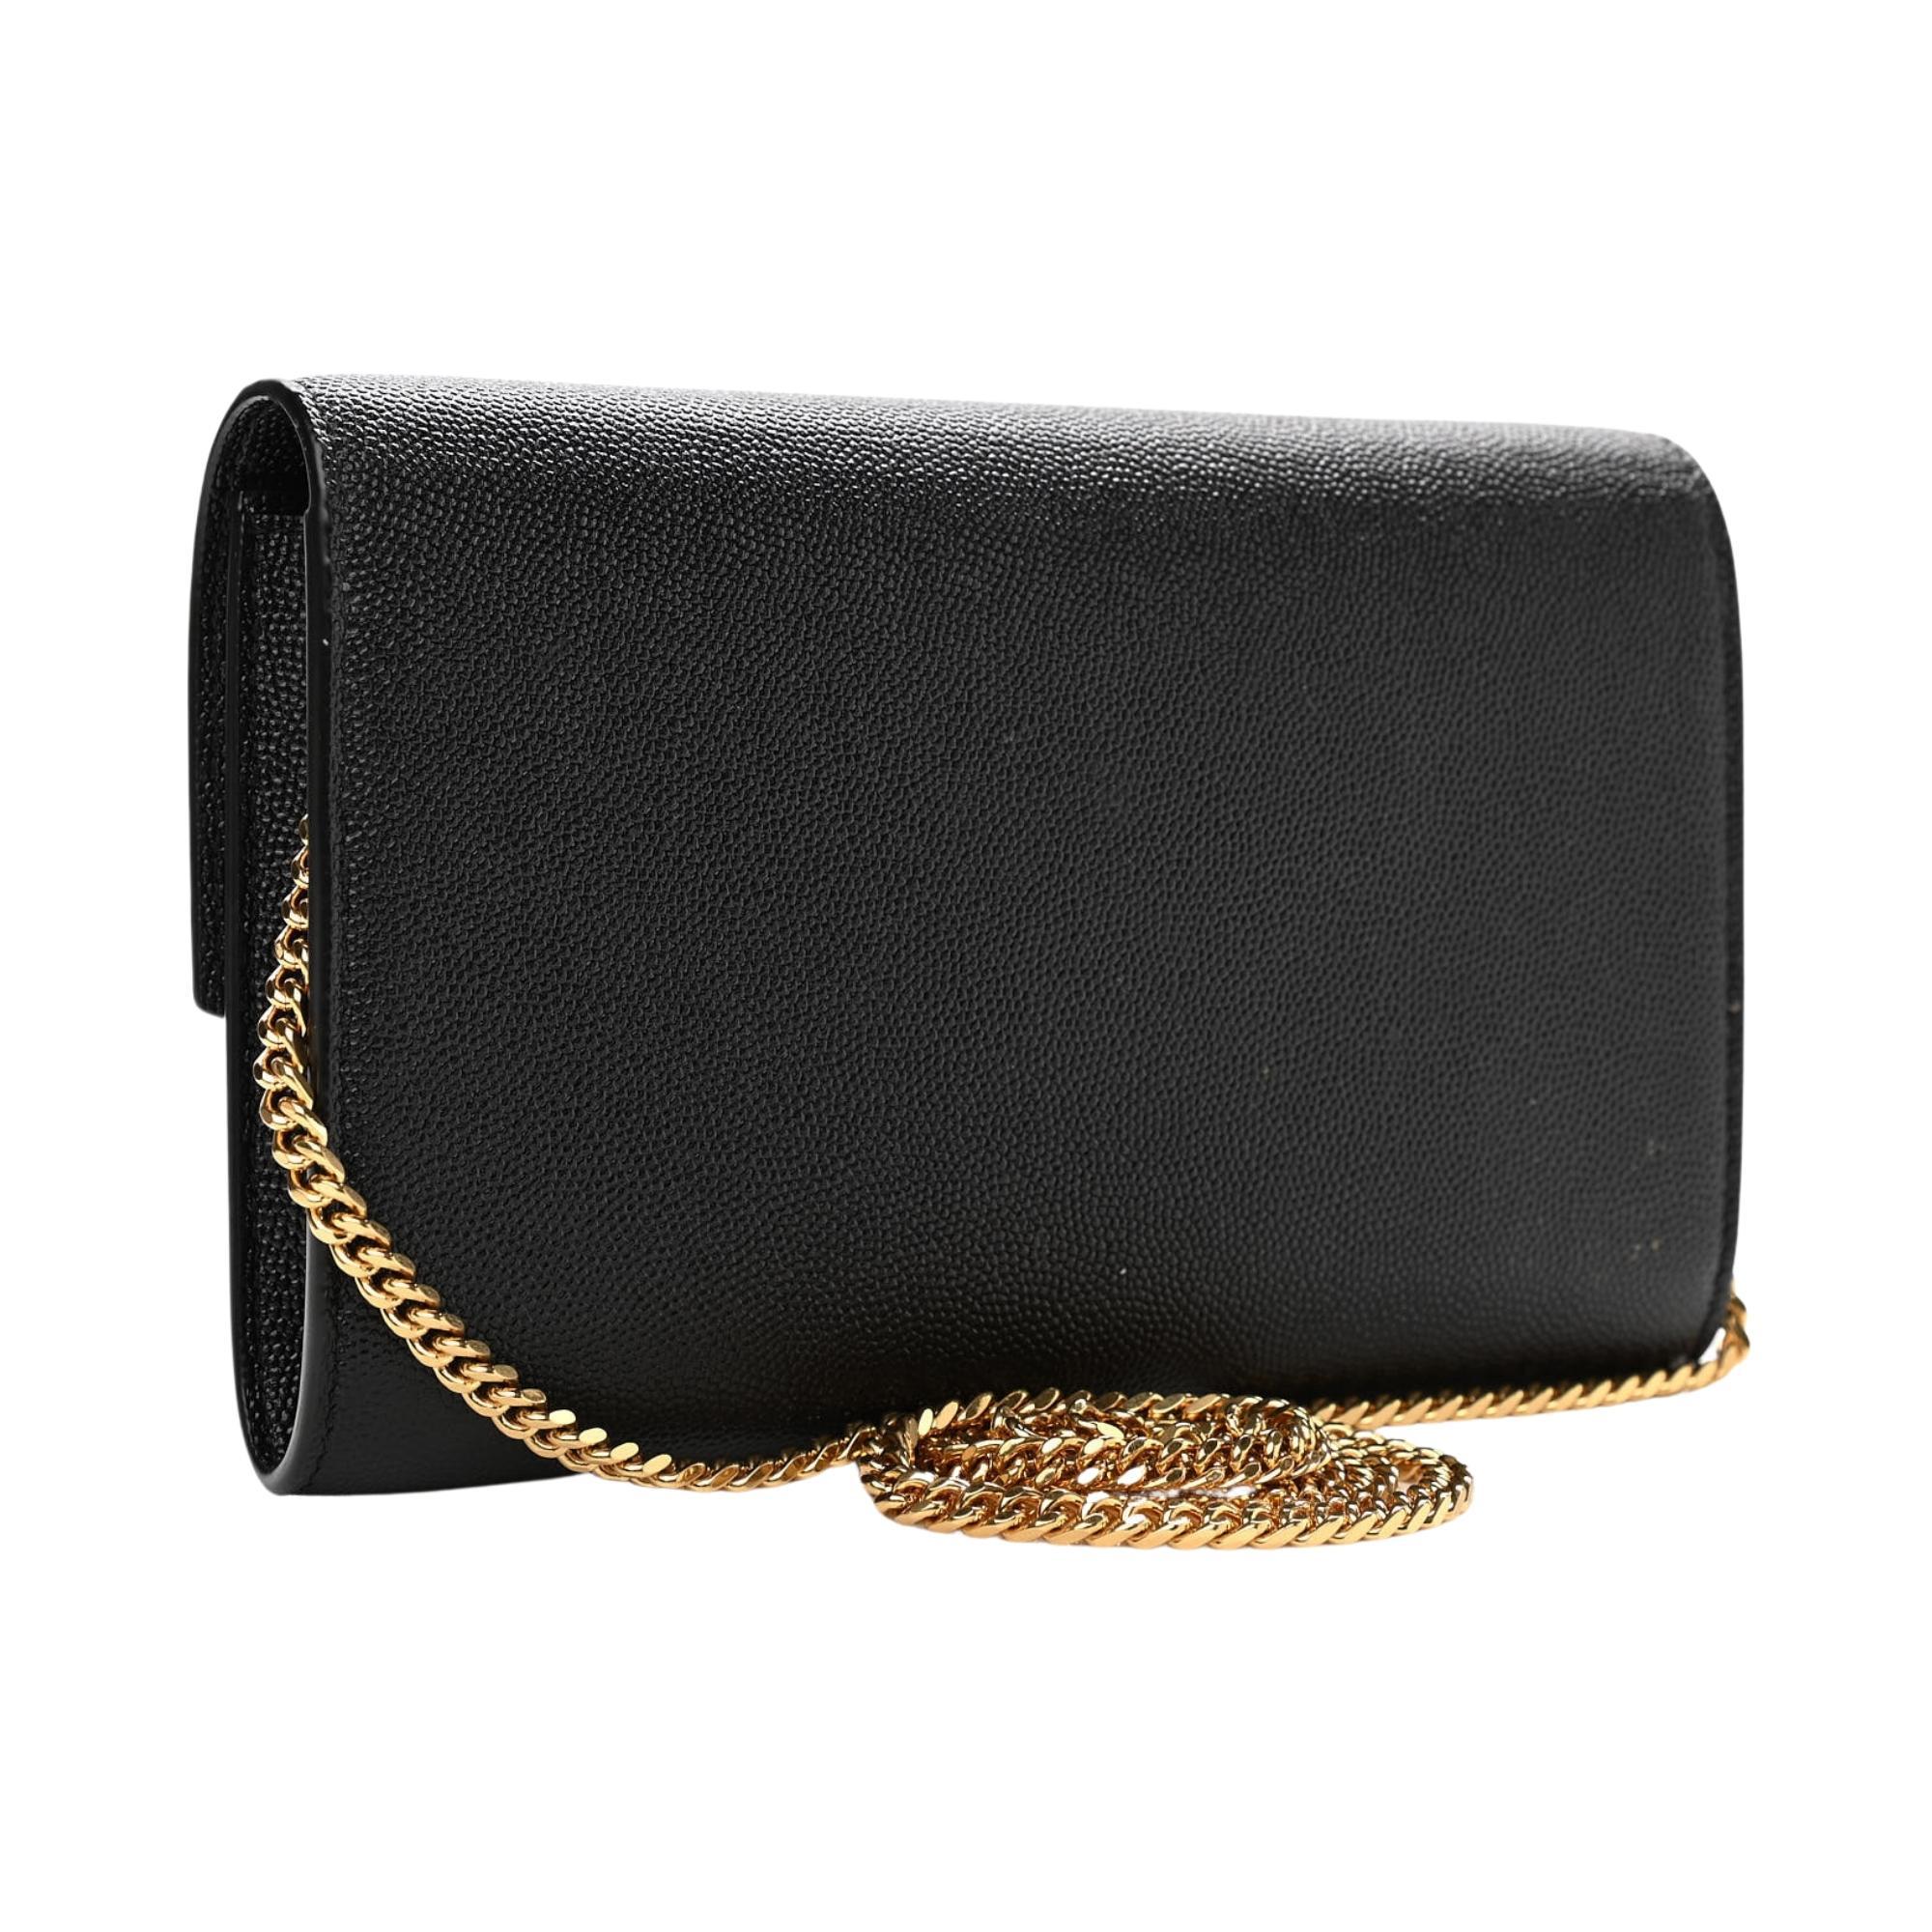 This bag is made of pebbled calfskin leather in black. The bag features an optional polished gold chain strap and a matching gold YSL monogram detail on the crossover flap. The bag opens to a black leather interior with a patch pocket.

COLOR: